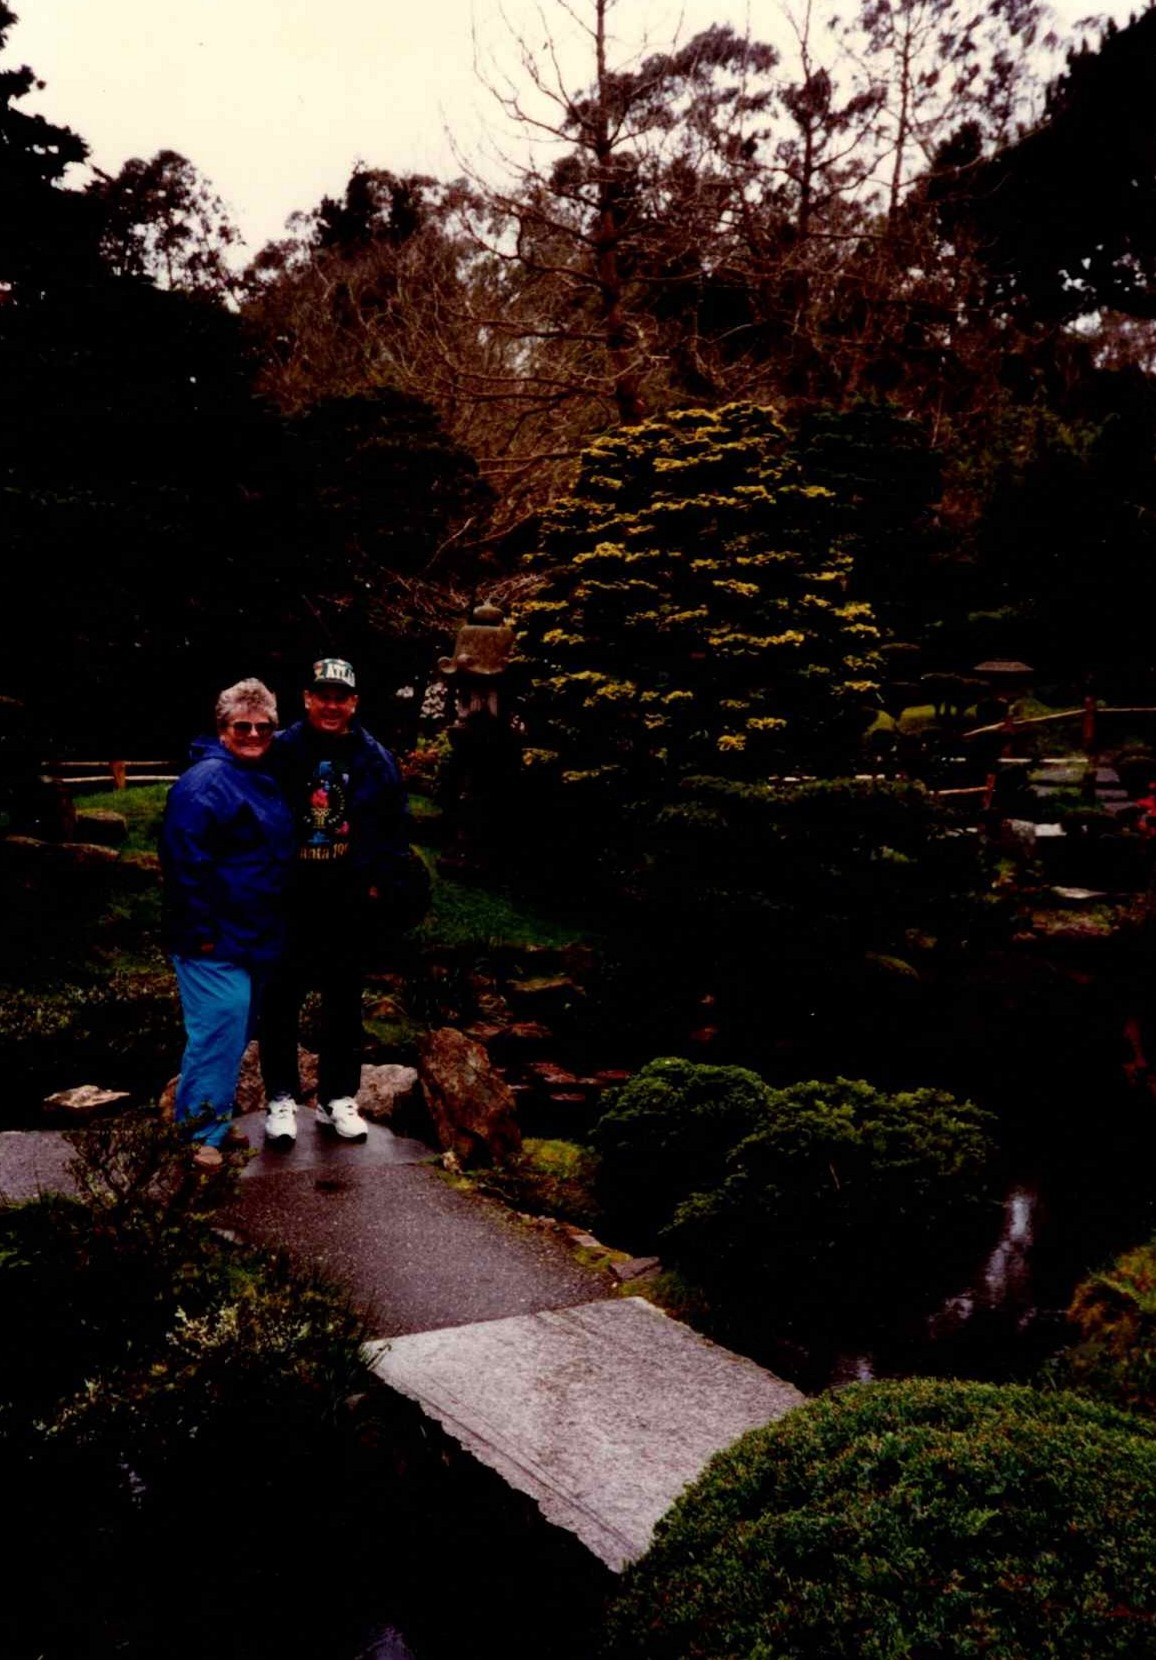 Together in the Beautiful Gardens